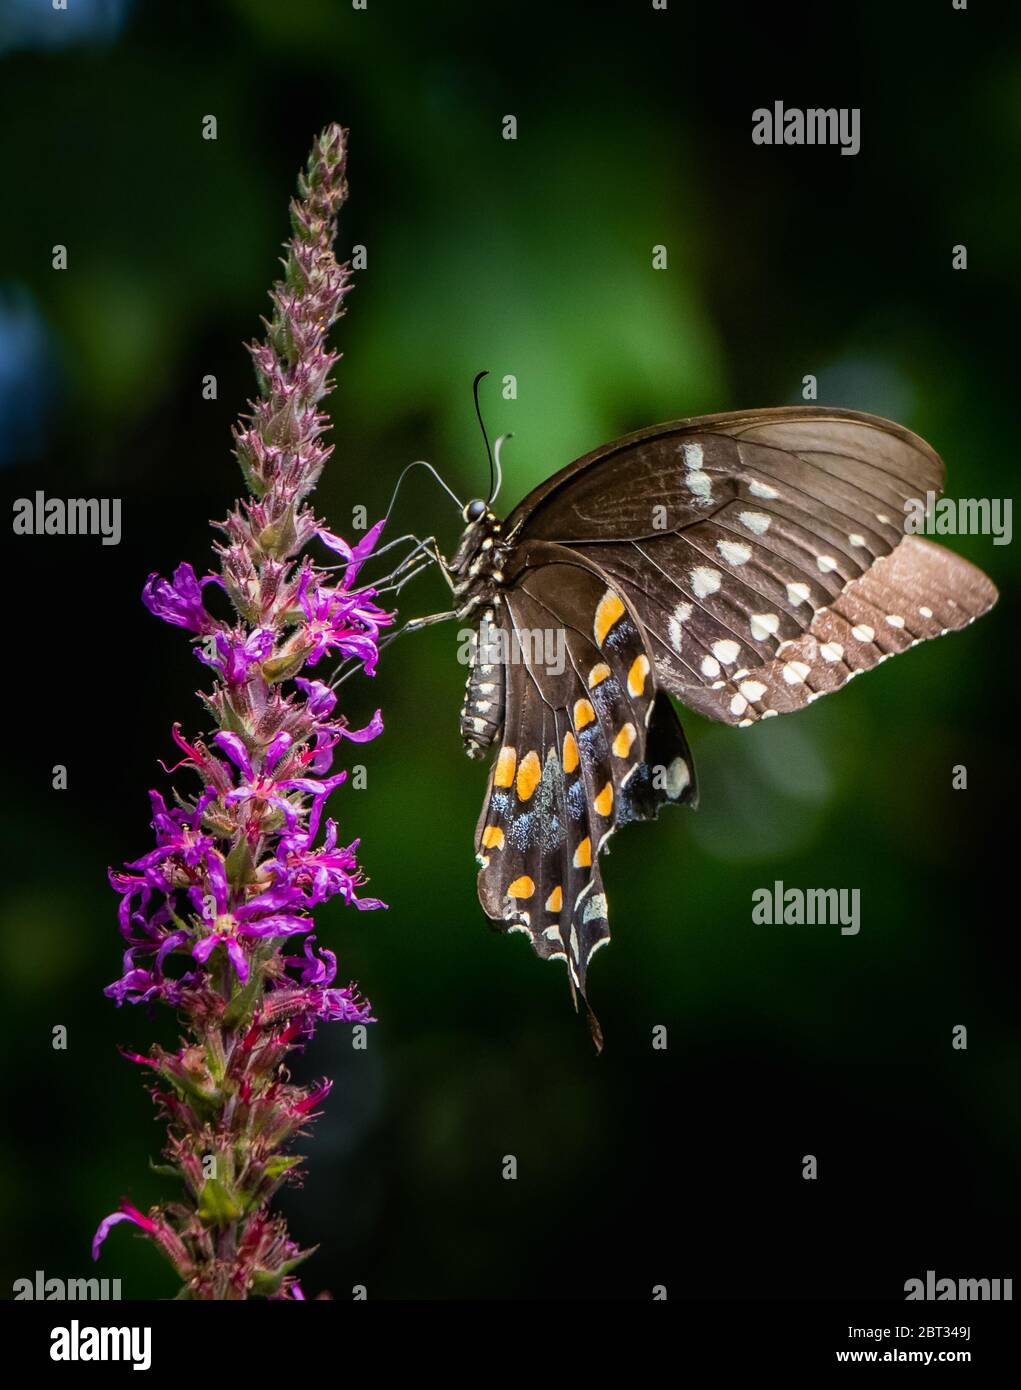 A Black Swallowtail butterfly feeds on nectar against a dark blurred background in a summer meadow Stock Photo